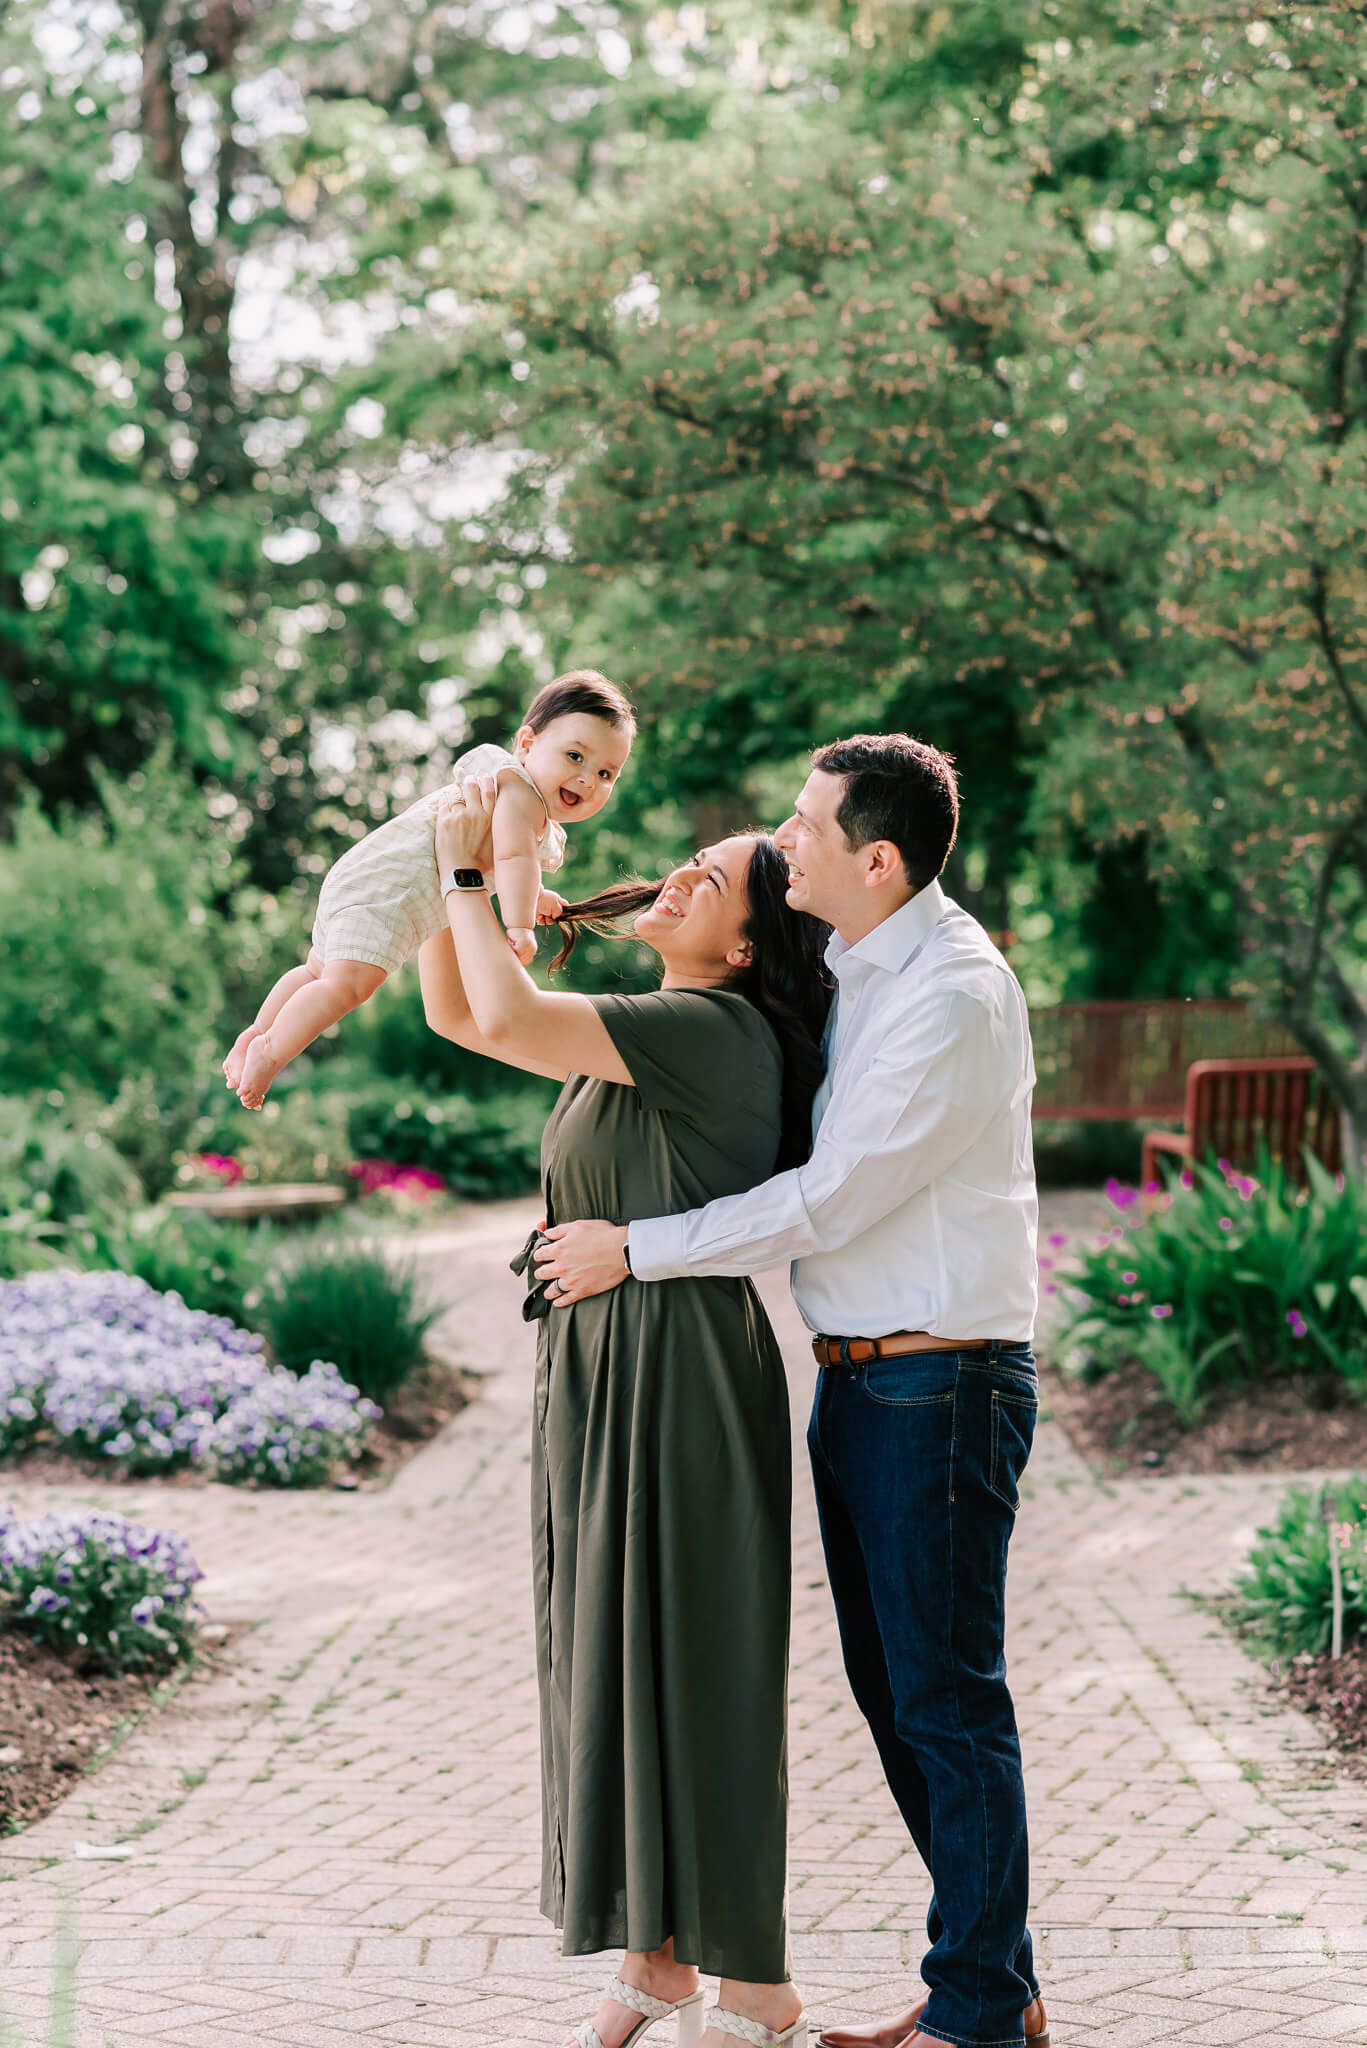 A mother and father lift and play with their infant child while standing in a flower garden path